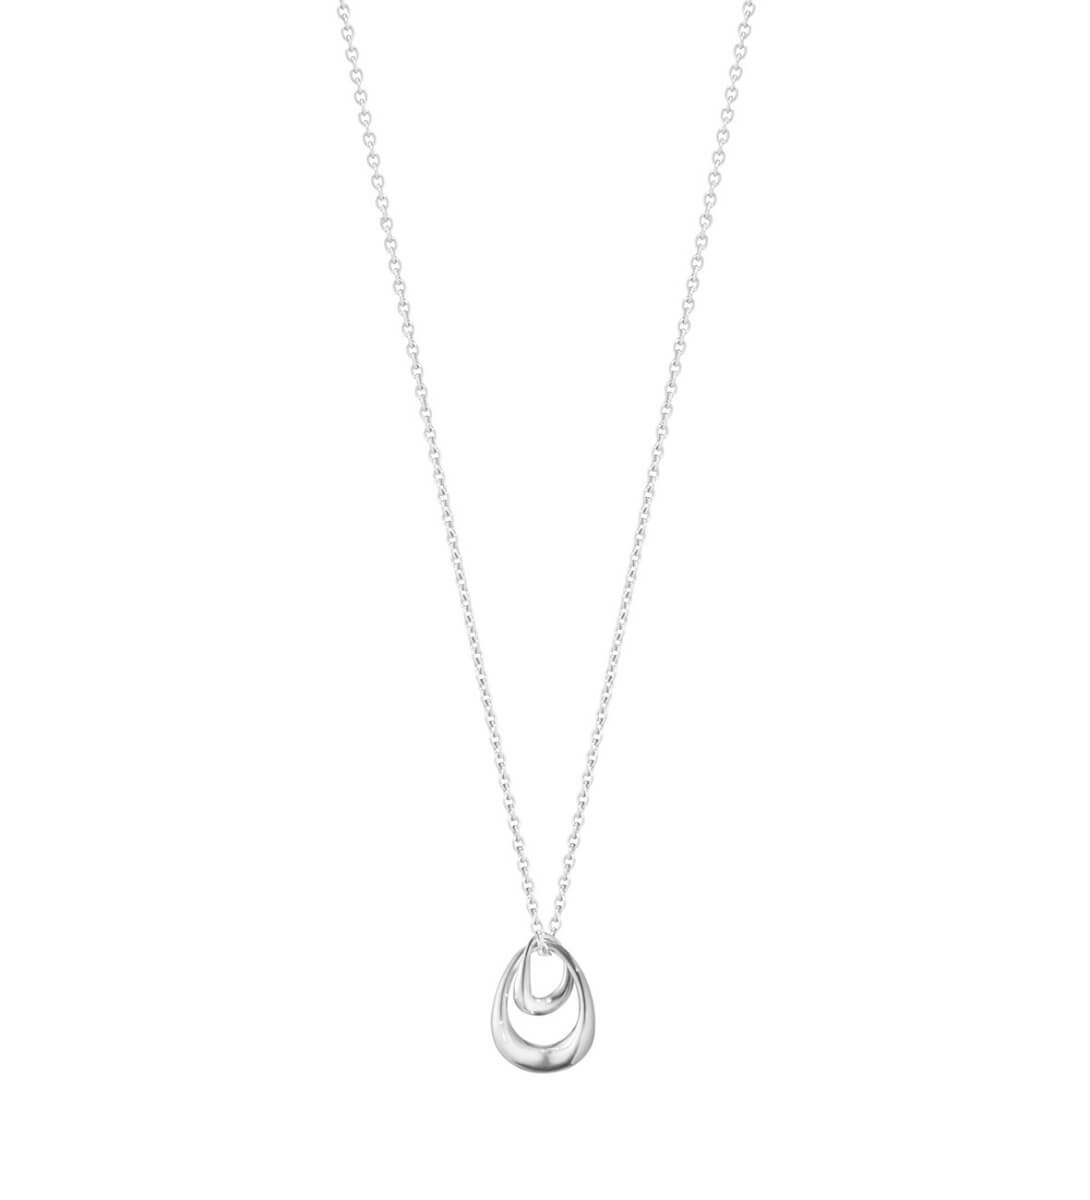 georg jensen silver offspring pendant and chain small 10012310